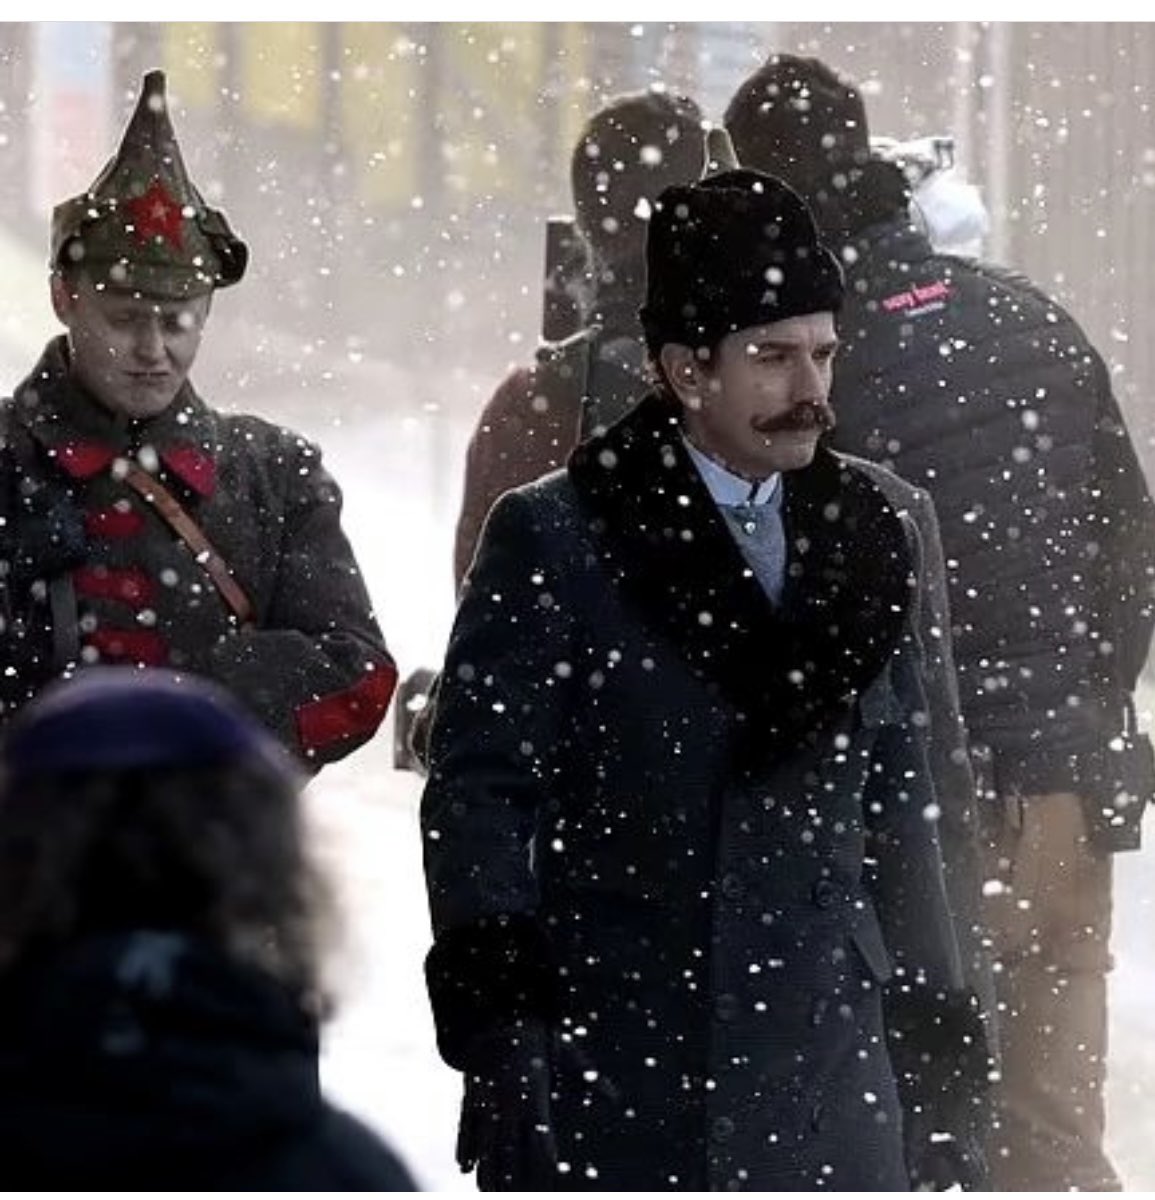 Ewan McGregor spotted as Count Rostov - making the walk from the Kremlin to the Metropol under faux snow. So the story begins… #AGentlemanInMoscow